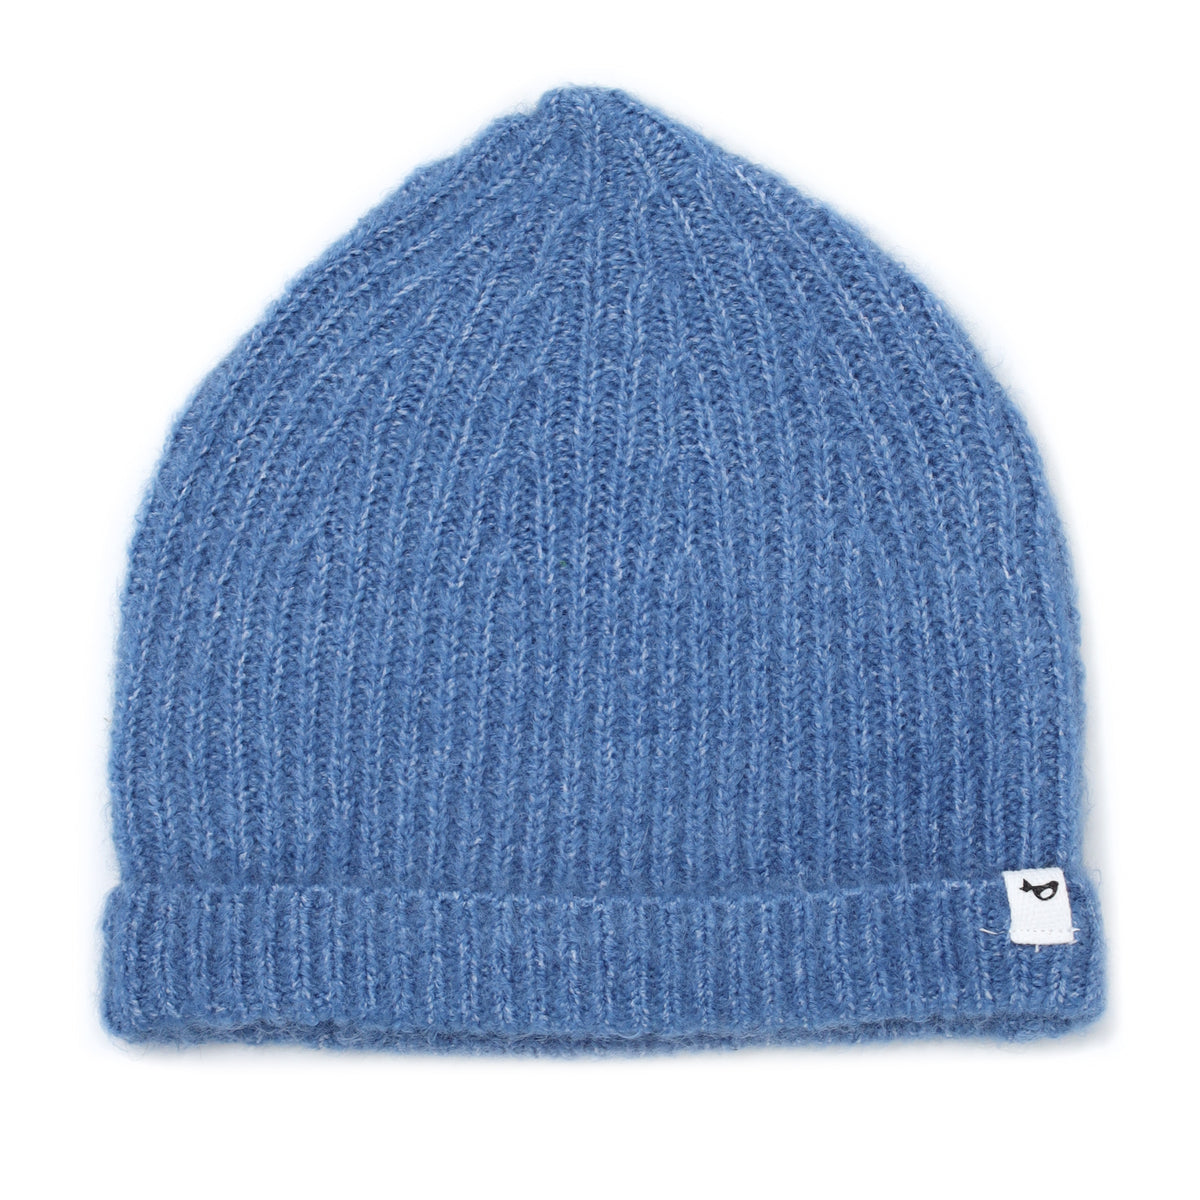 oh baby! Watchcap Fuzzy Knit Hat - Blue